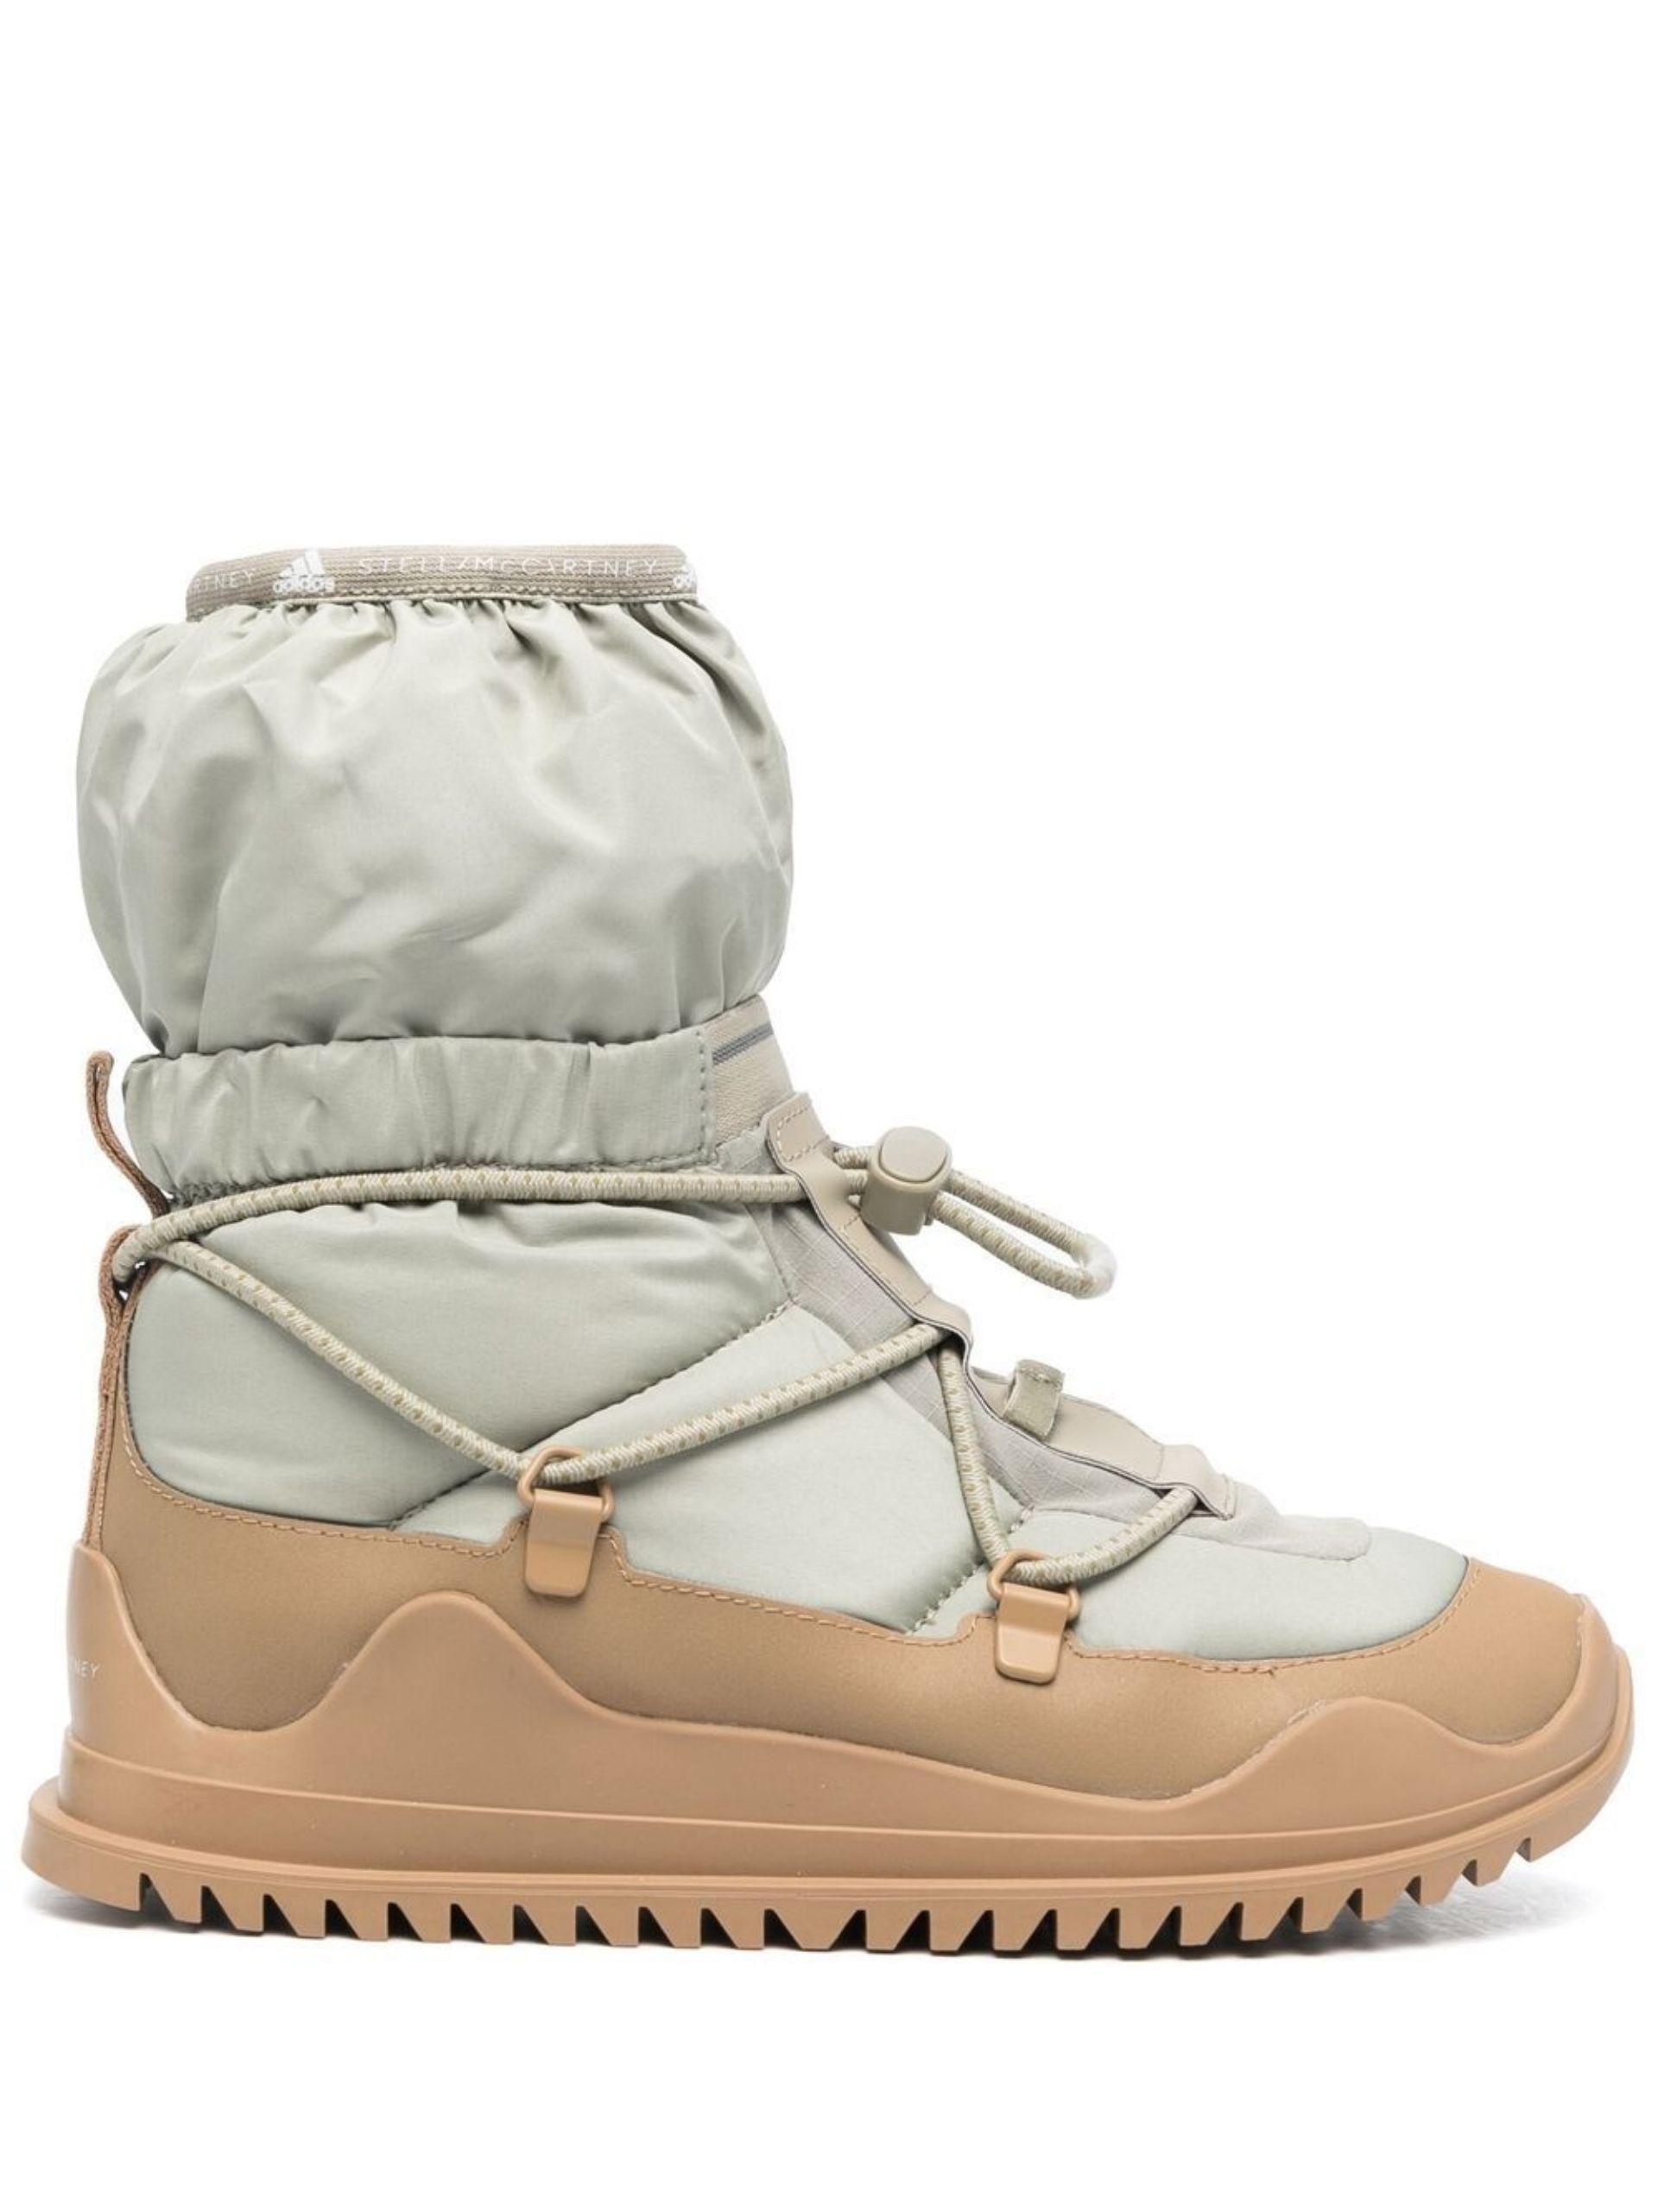 adidas By Stella McCartney Stivaletto Chunky Boots - Women's -  Rubber/fabric in Natural | Lyst